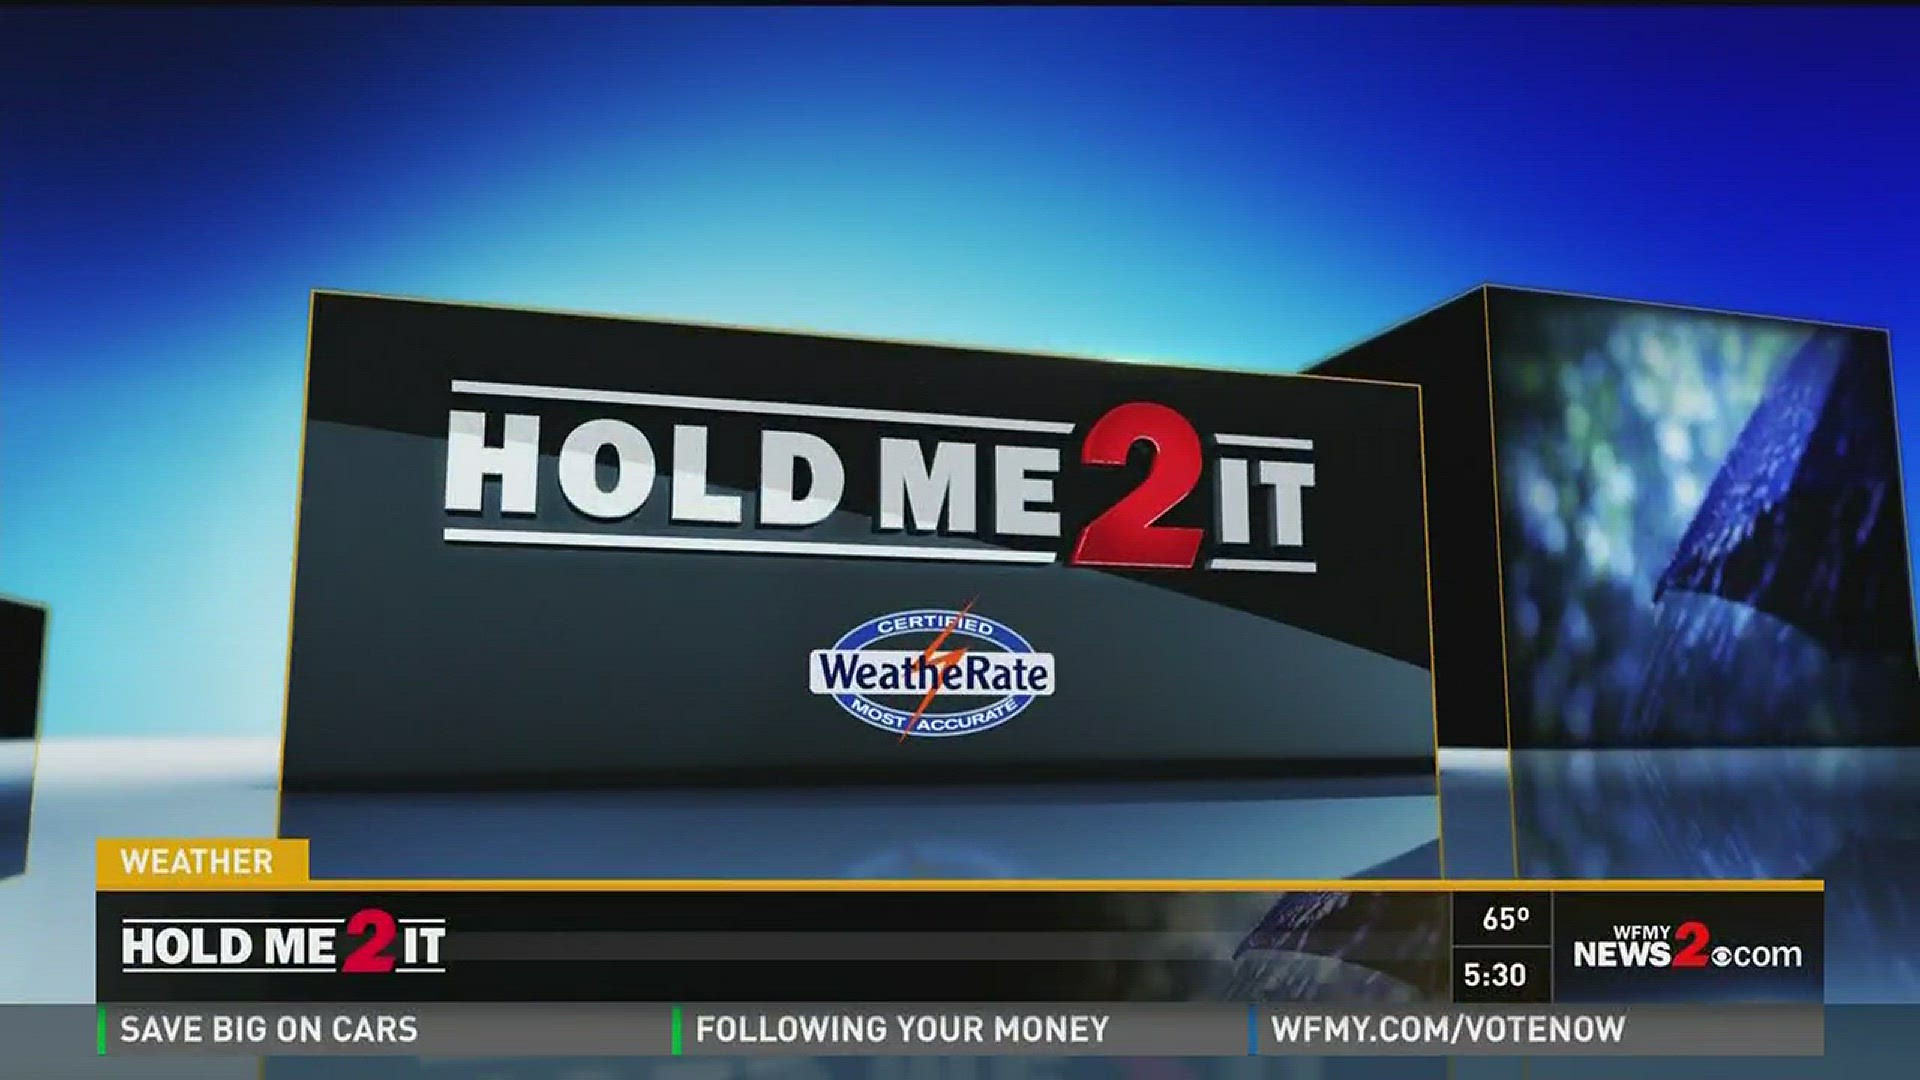 Hold Me 2 It Forecast: Wednesday, March 1, 2017